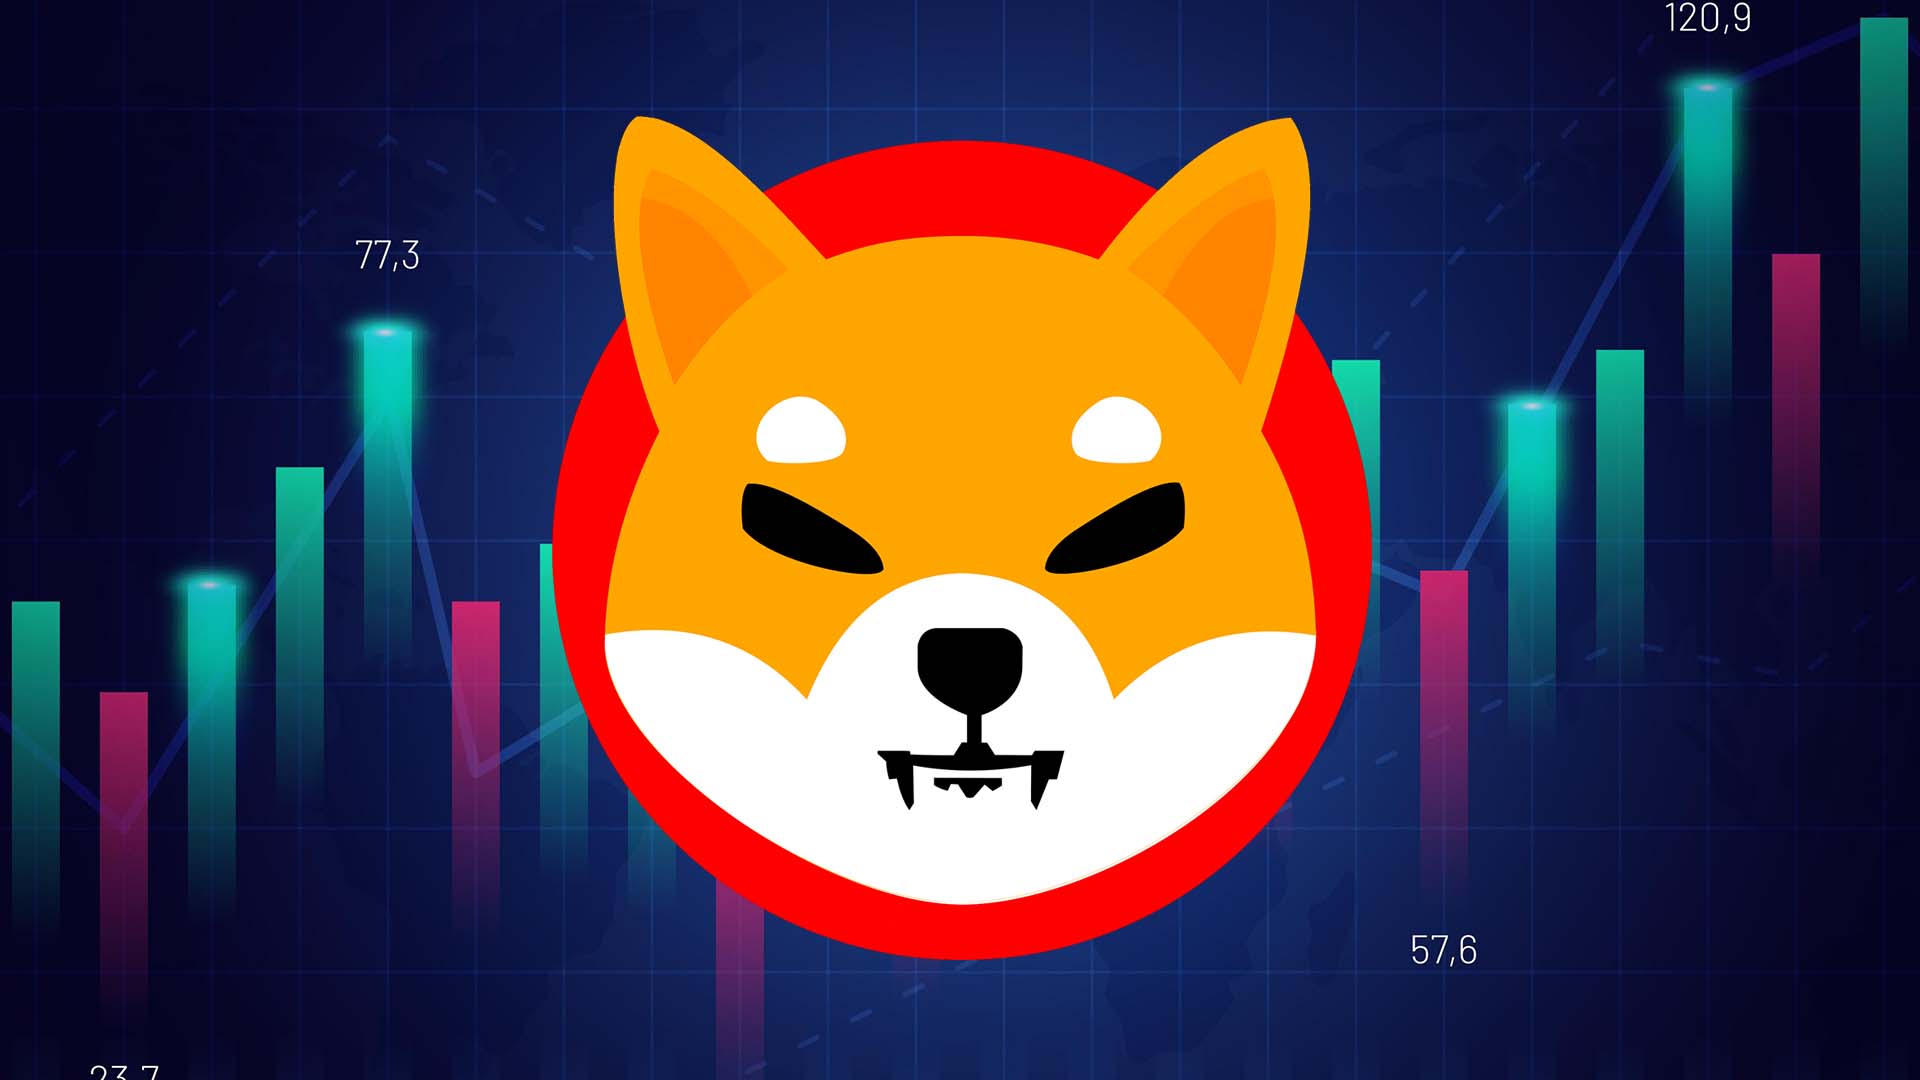 Shiba Inu Price Prediction: SHIB to Reach $1.00 by the end of 2023 – Exclusive Technical Analysis!